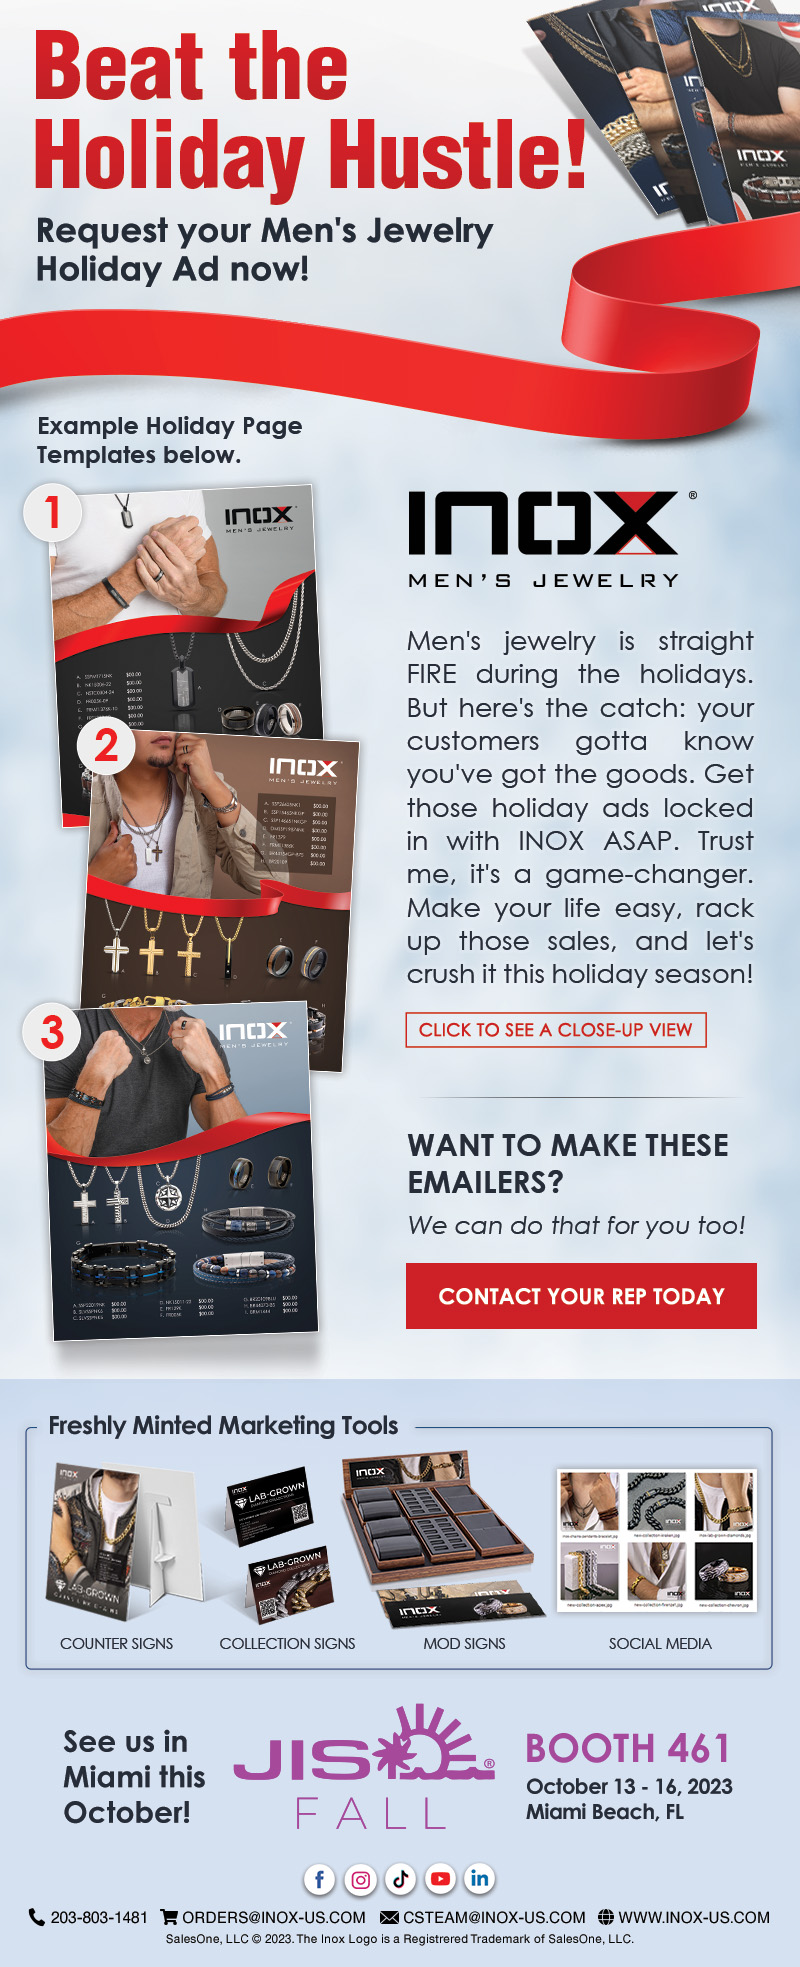 Beat the Holiday Hustle with INOX Men's Jewelry!